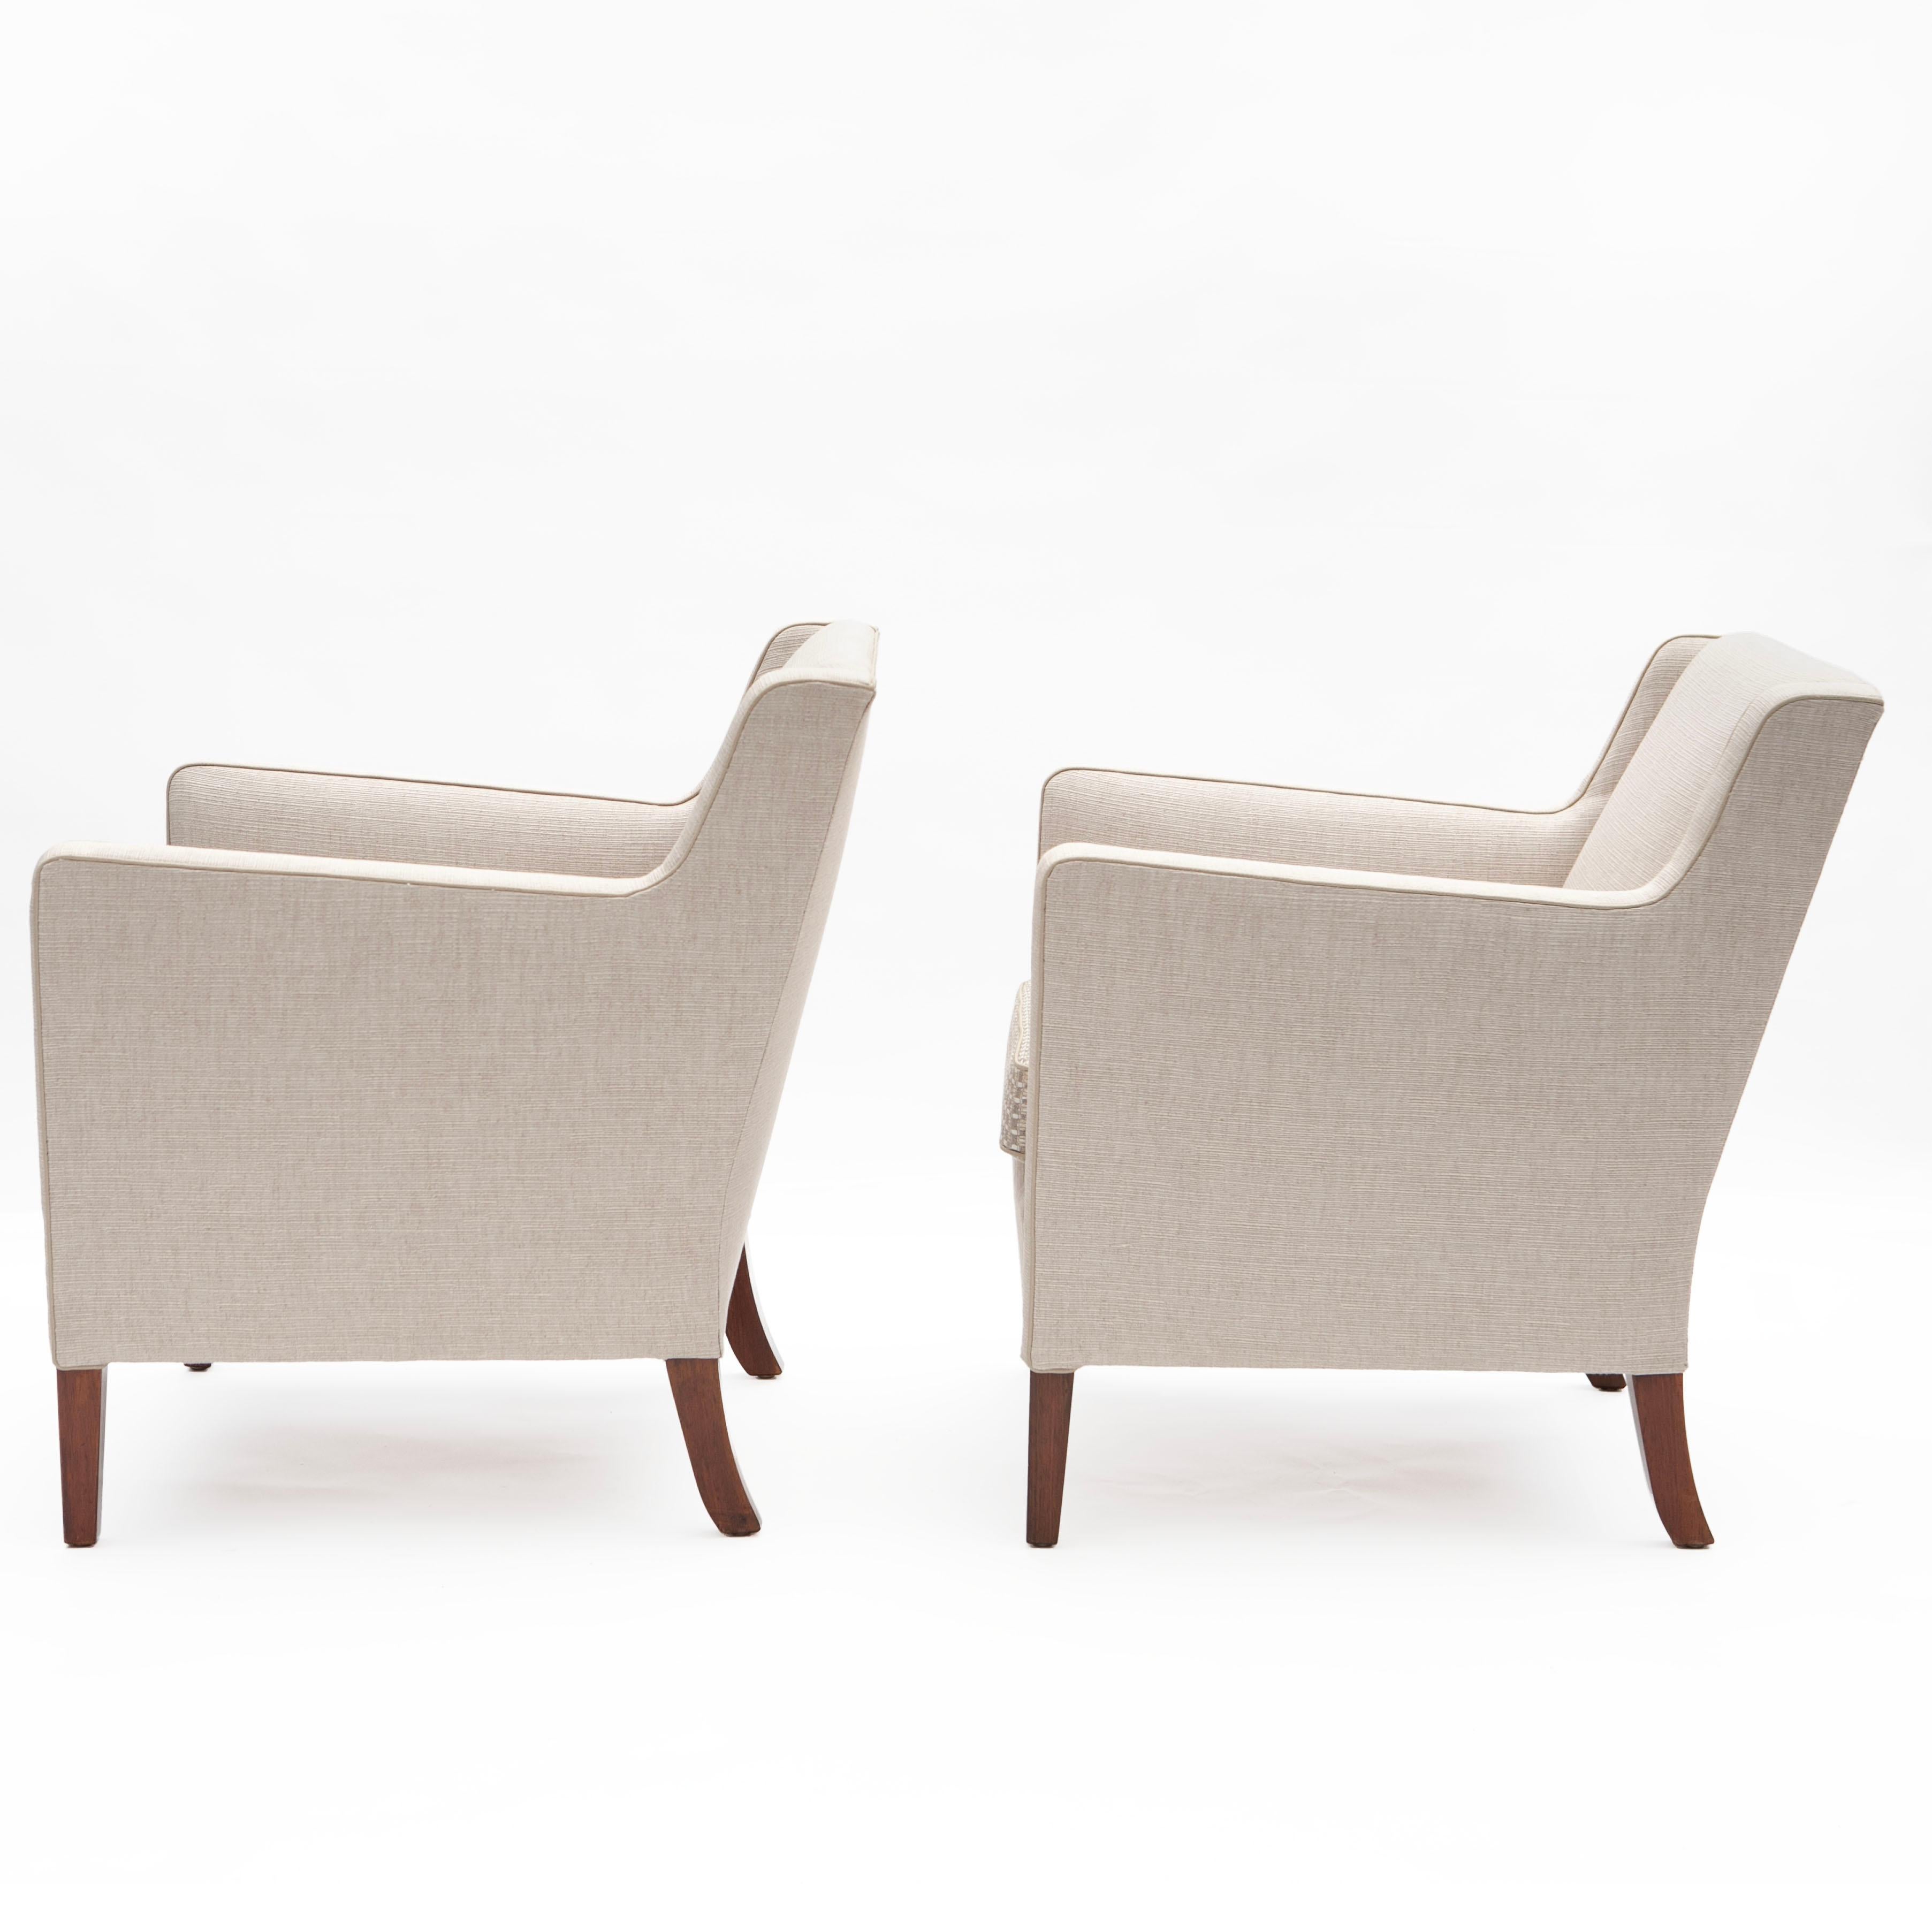 20th Century Pair of Frits Henningsen Lounge Chairs Denmark 1950's For Sale